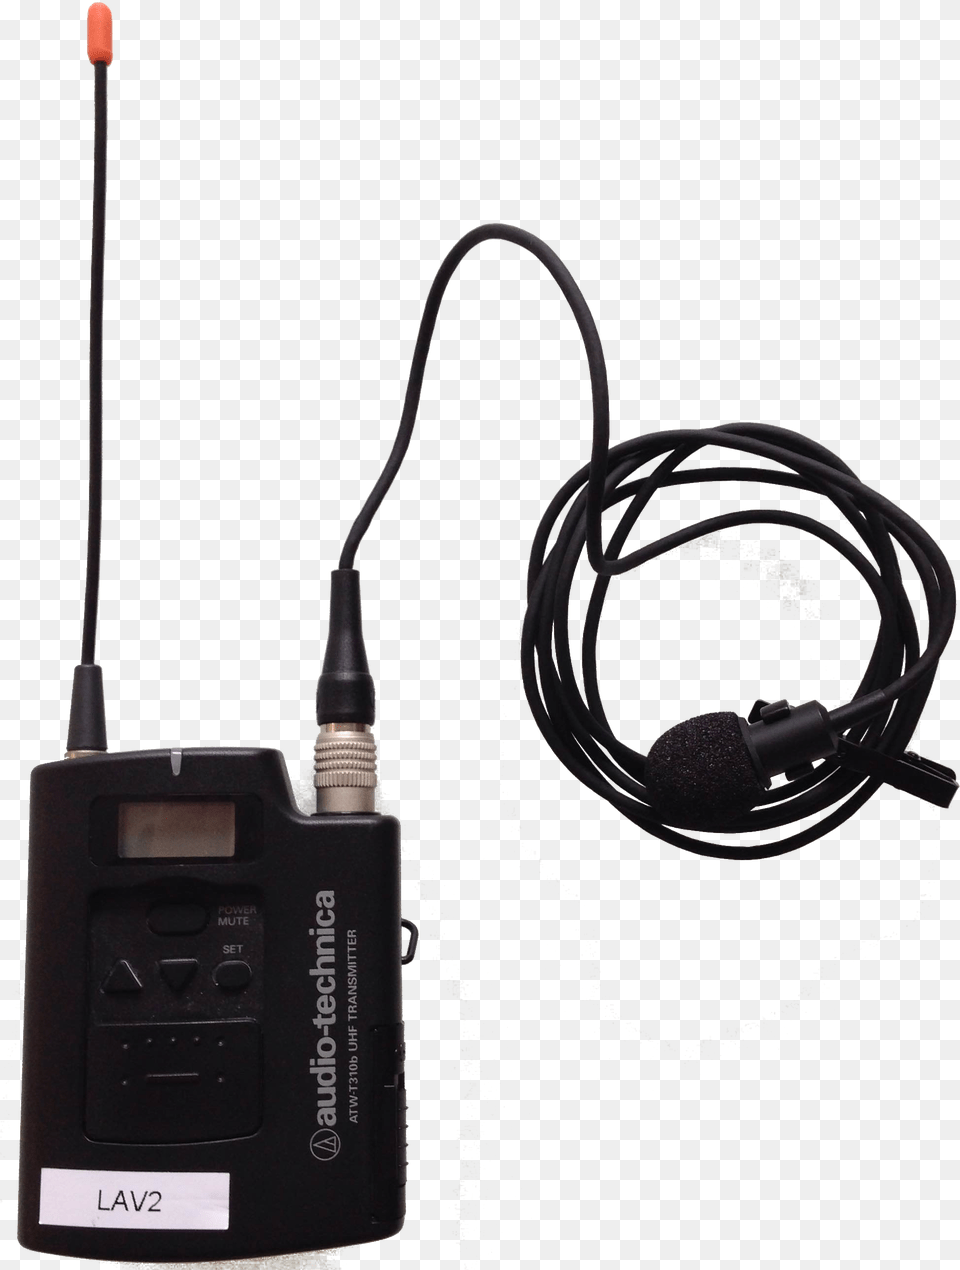 File Lav2 Se Llama El Microfono Que Usan, Adapter, Electronics, Electrical Device, Microphone Png